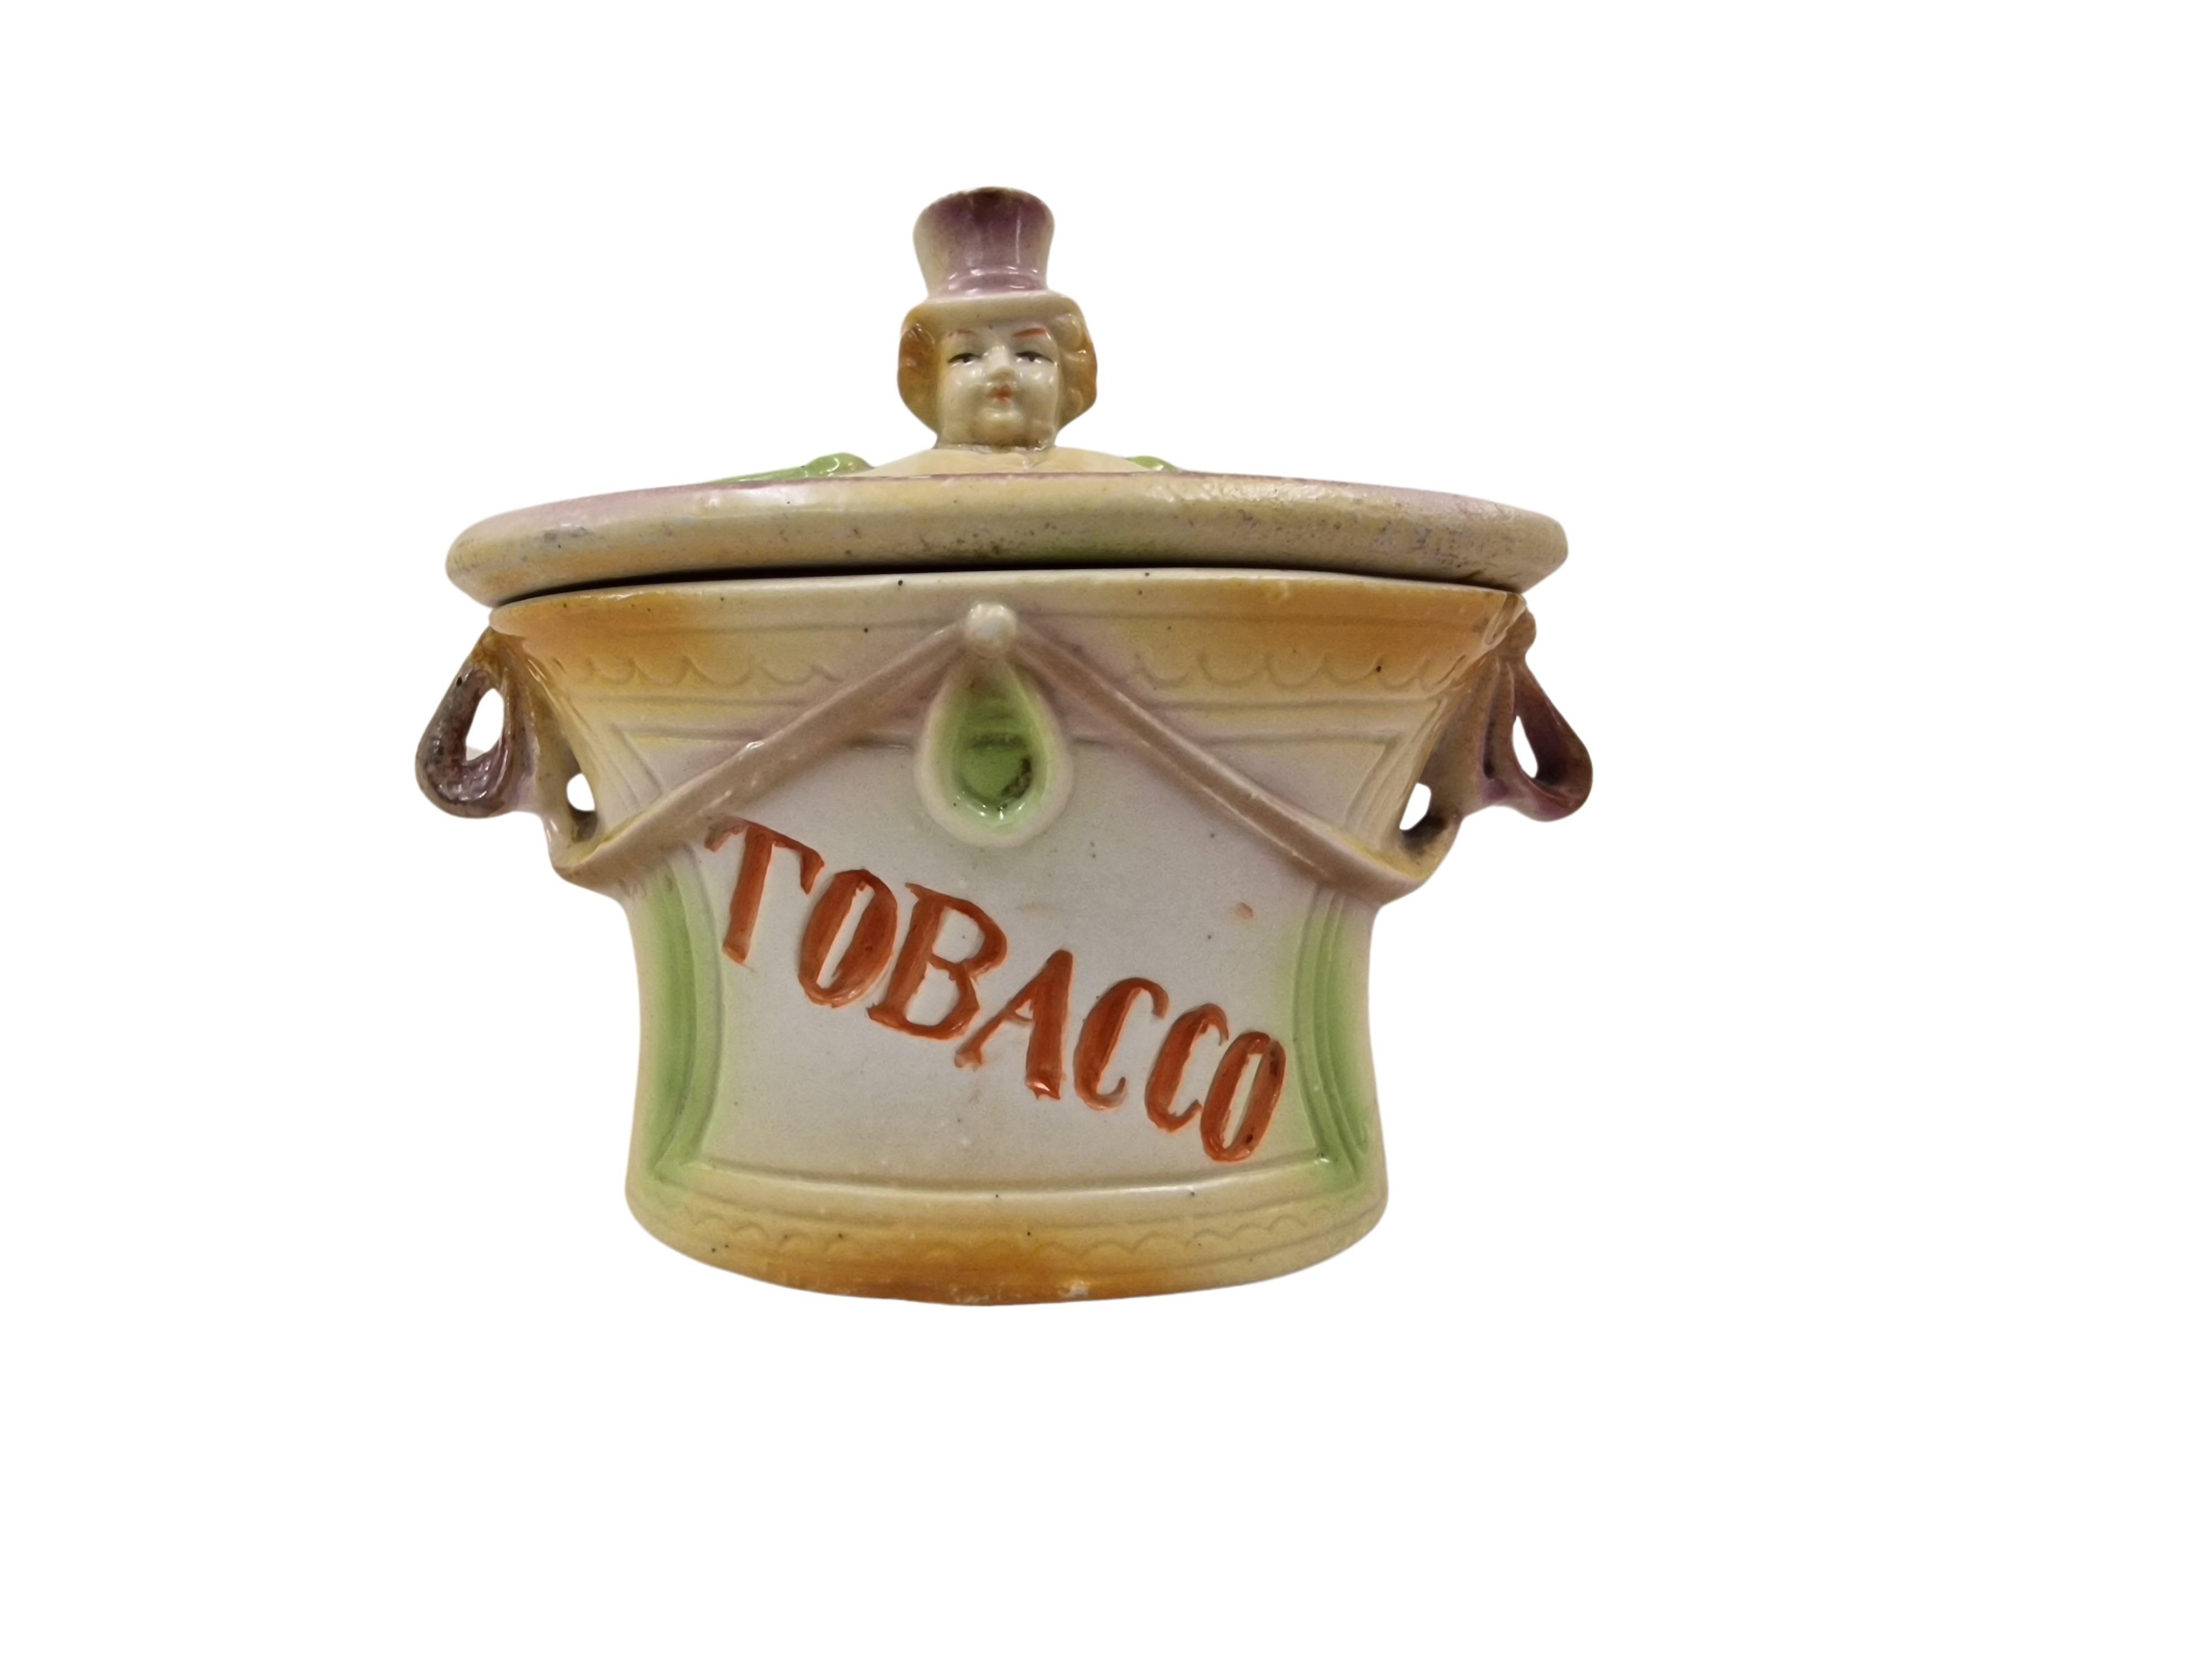 Extraordinary, charming tobacco box, made of bisque porcelain, around 1900, an original Art Nouveau piece, not labled but most probably made in England. 

The tobacco box is oval in shape and has a lid - the handle of which is in the shape of a